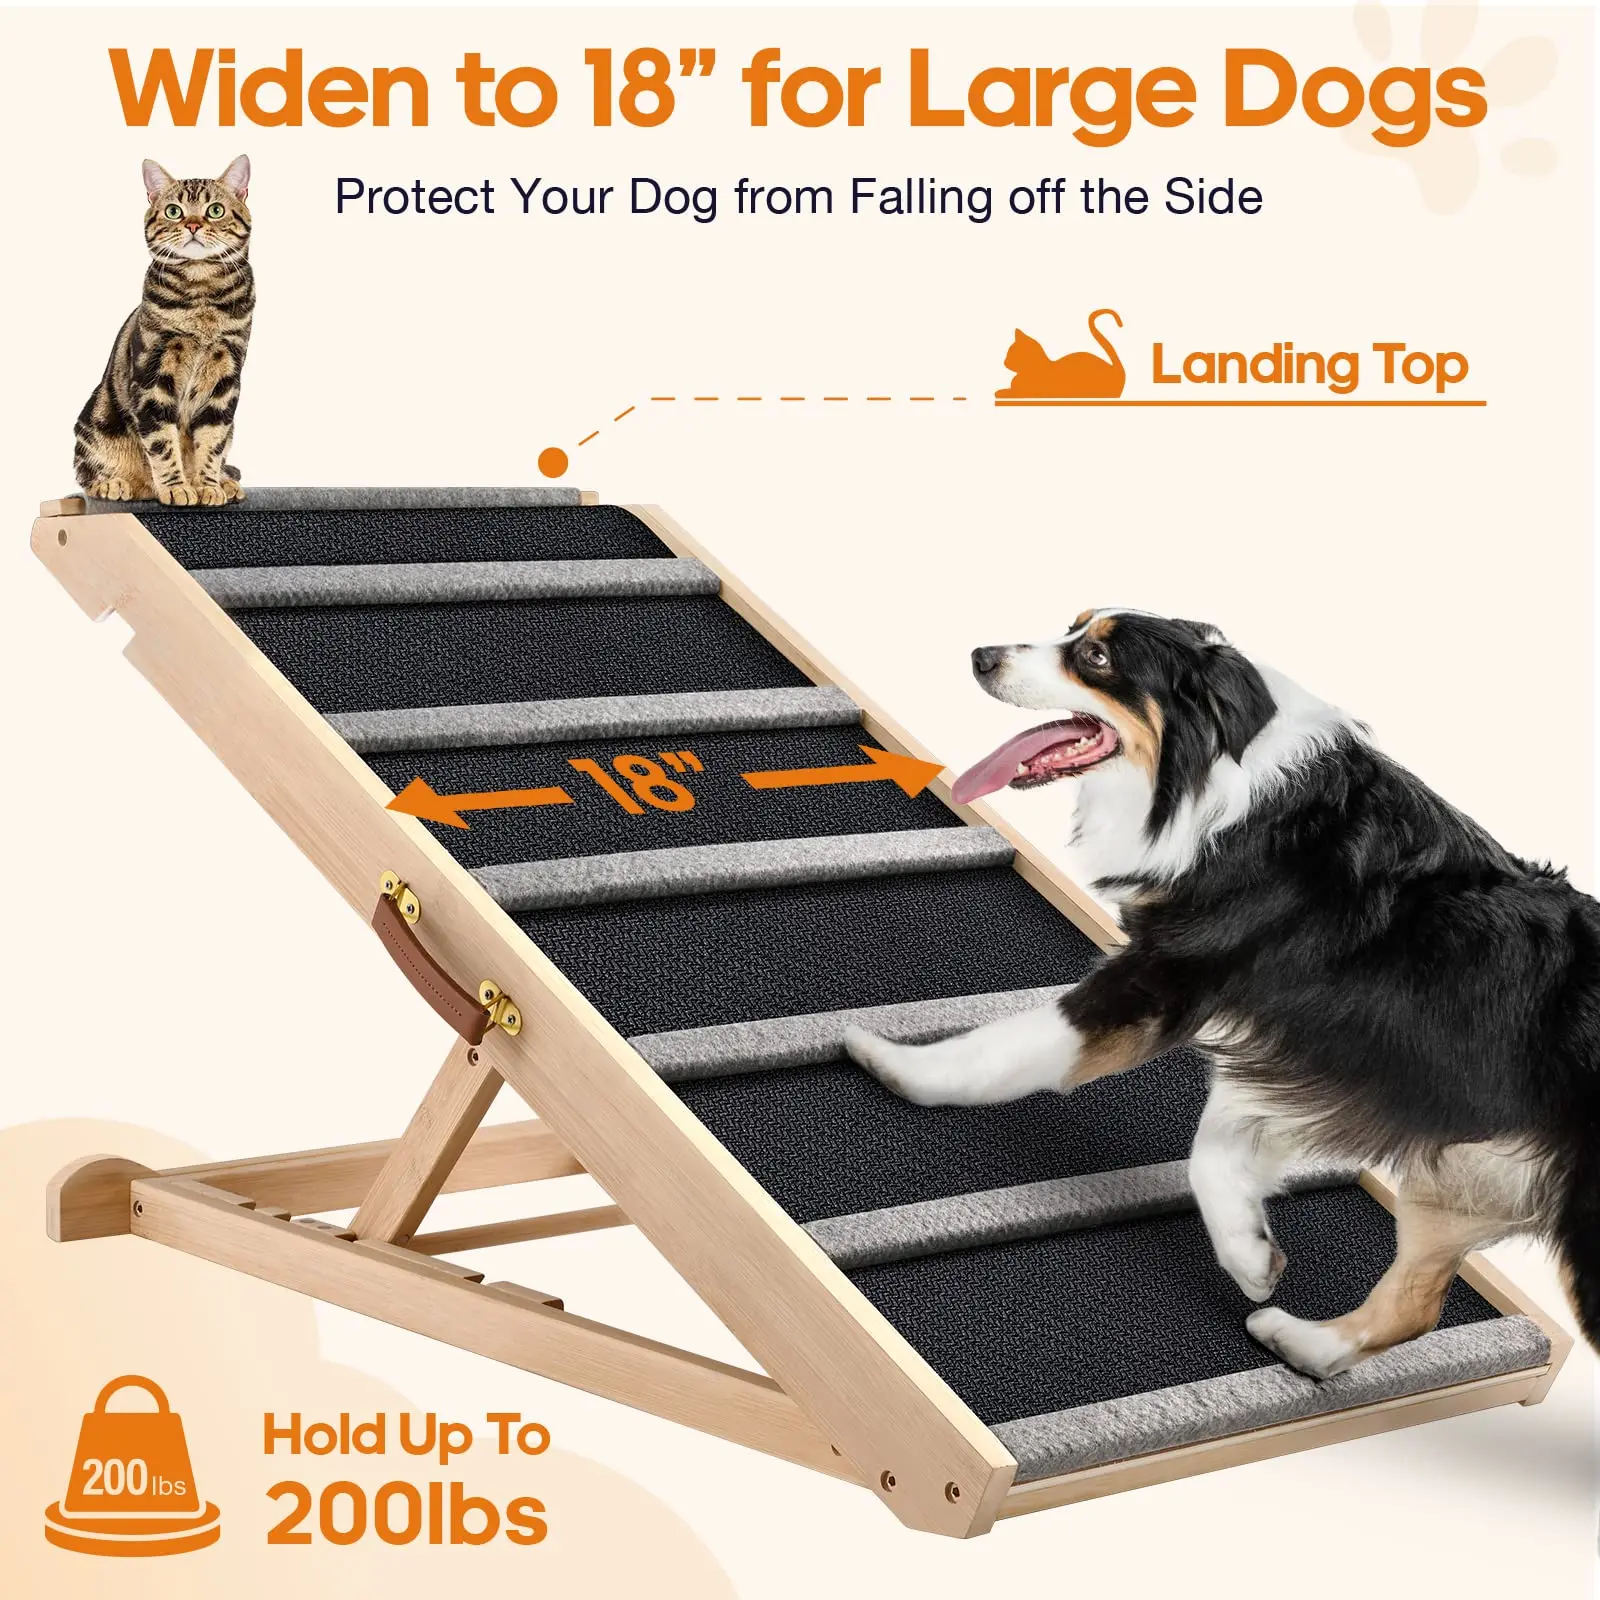 Zmaker Adjustable Dog Ramp For Bed Foldable Pet Stairs With Non-slip ...